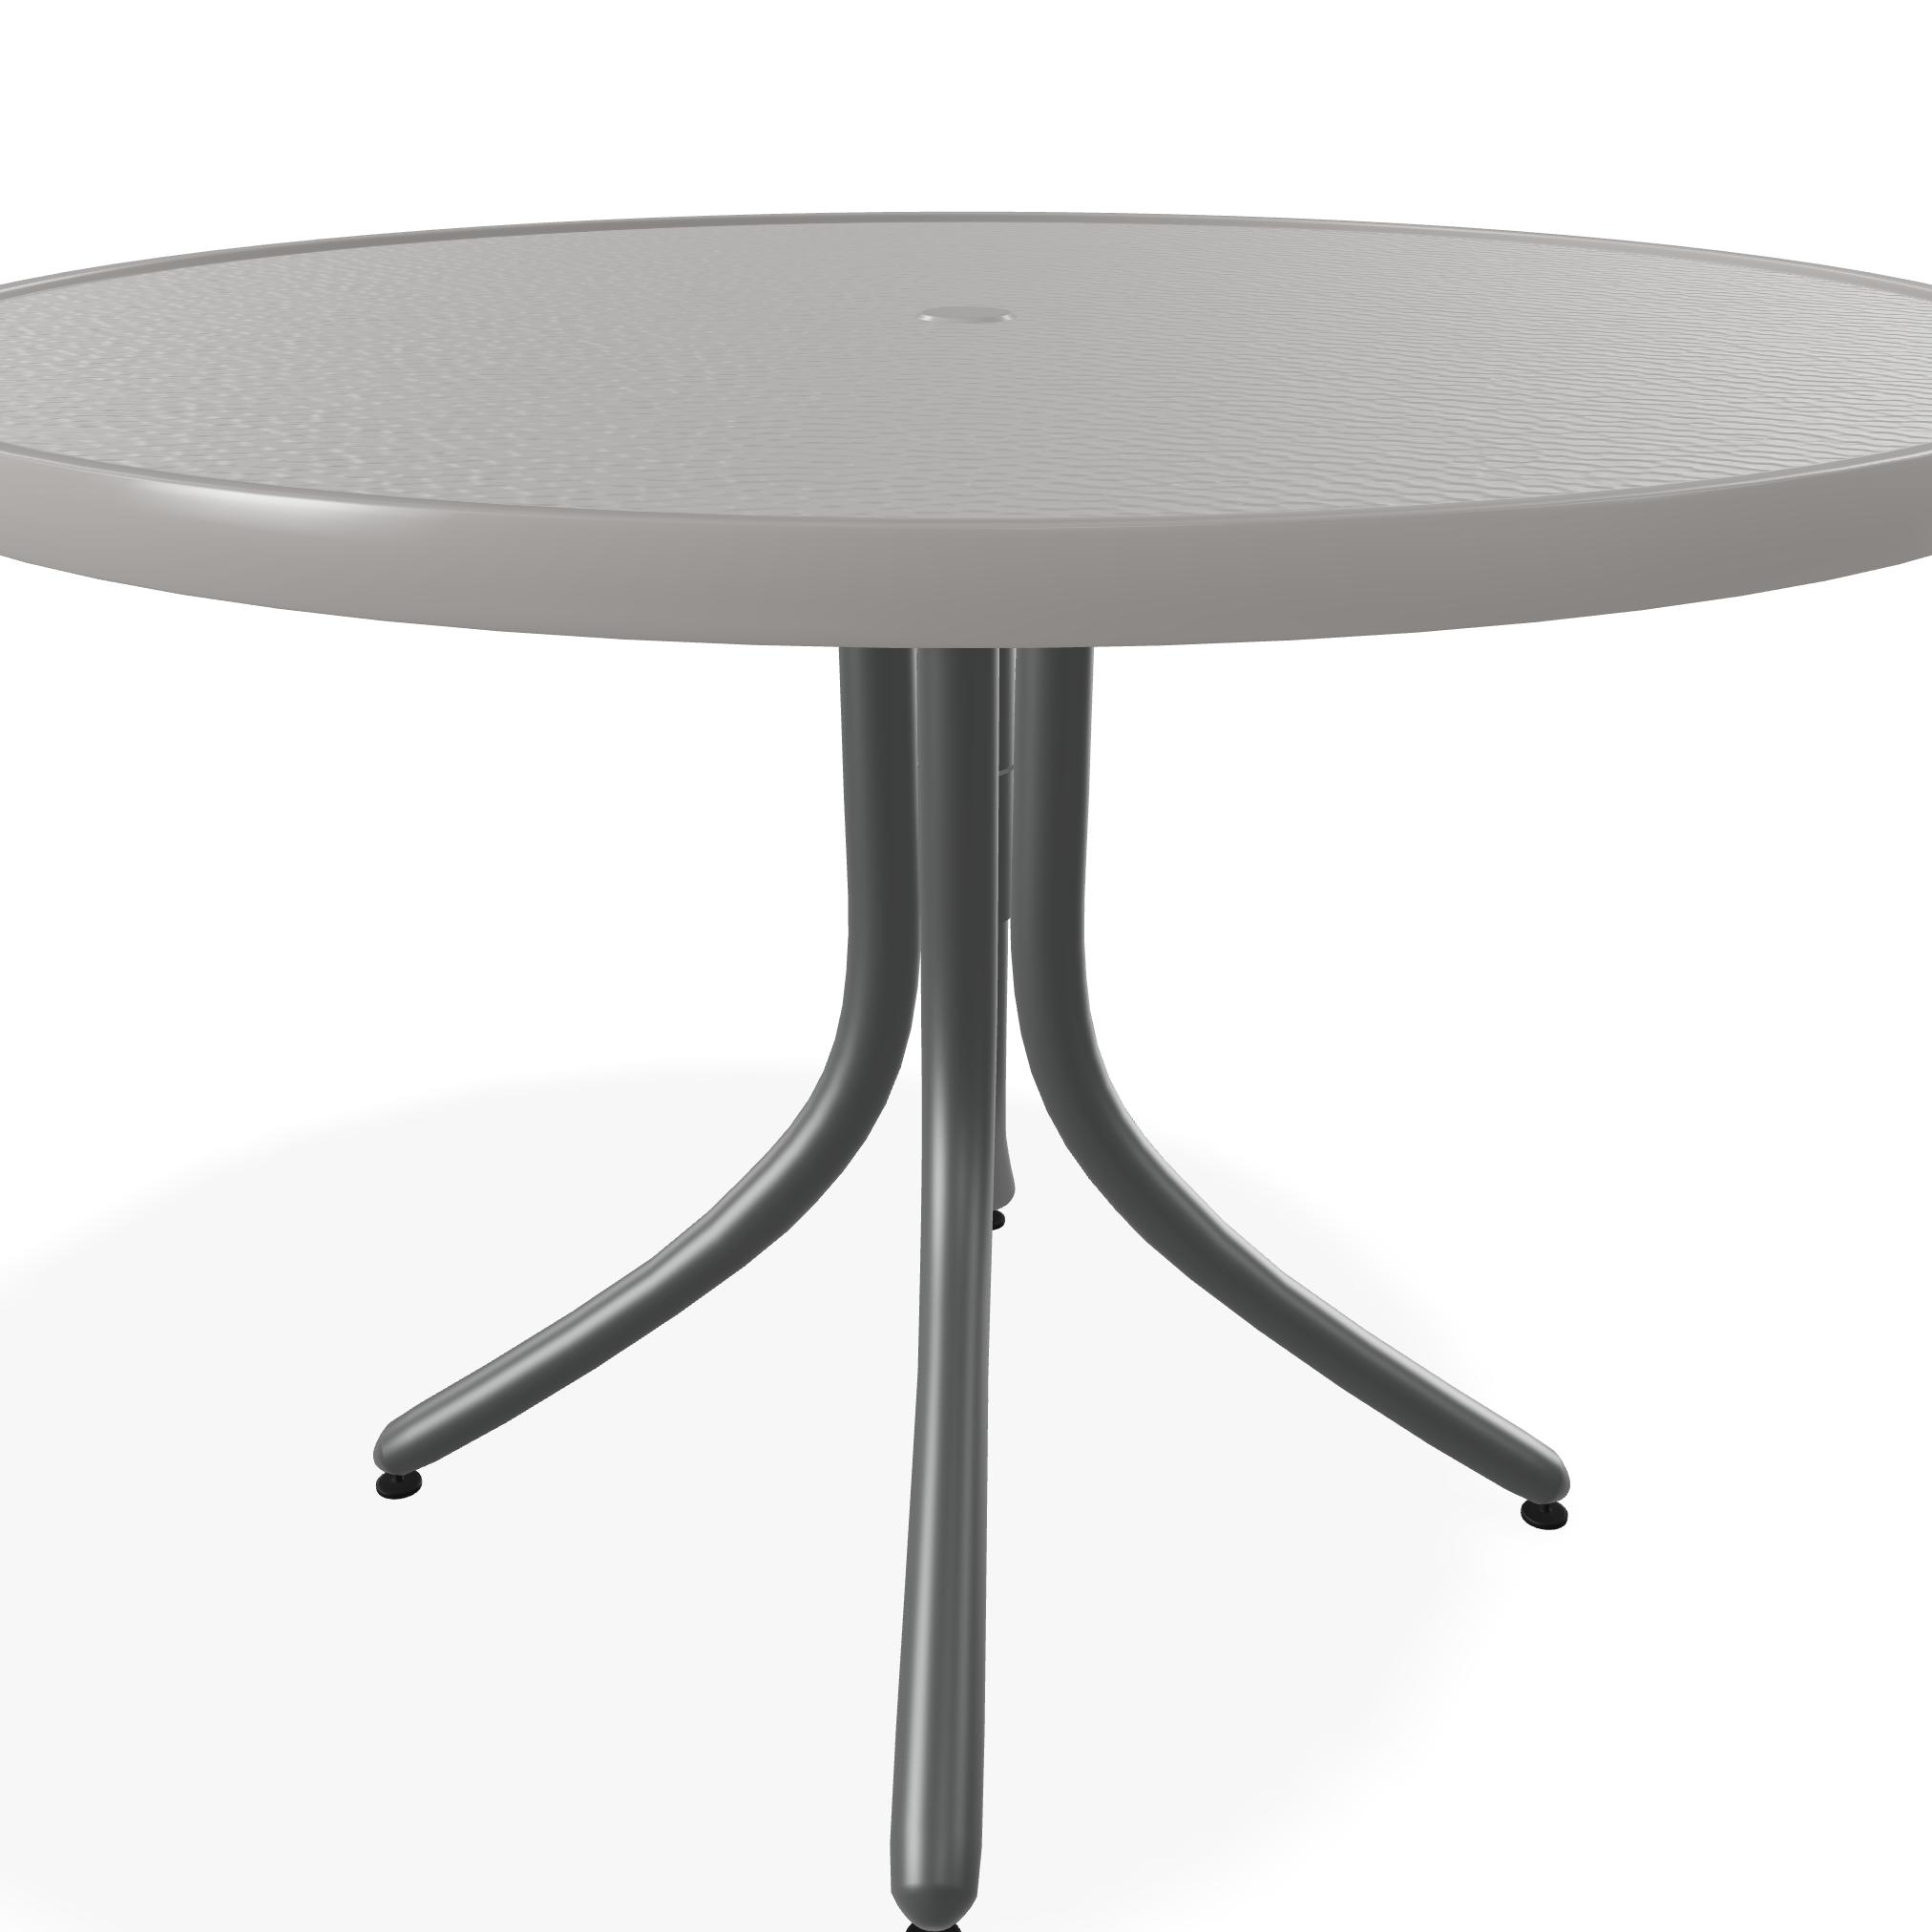 30" Round Value Hammered MGP Top Tables